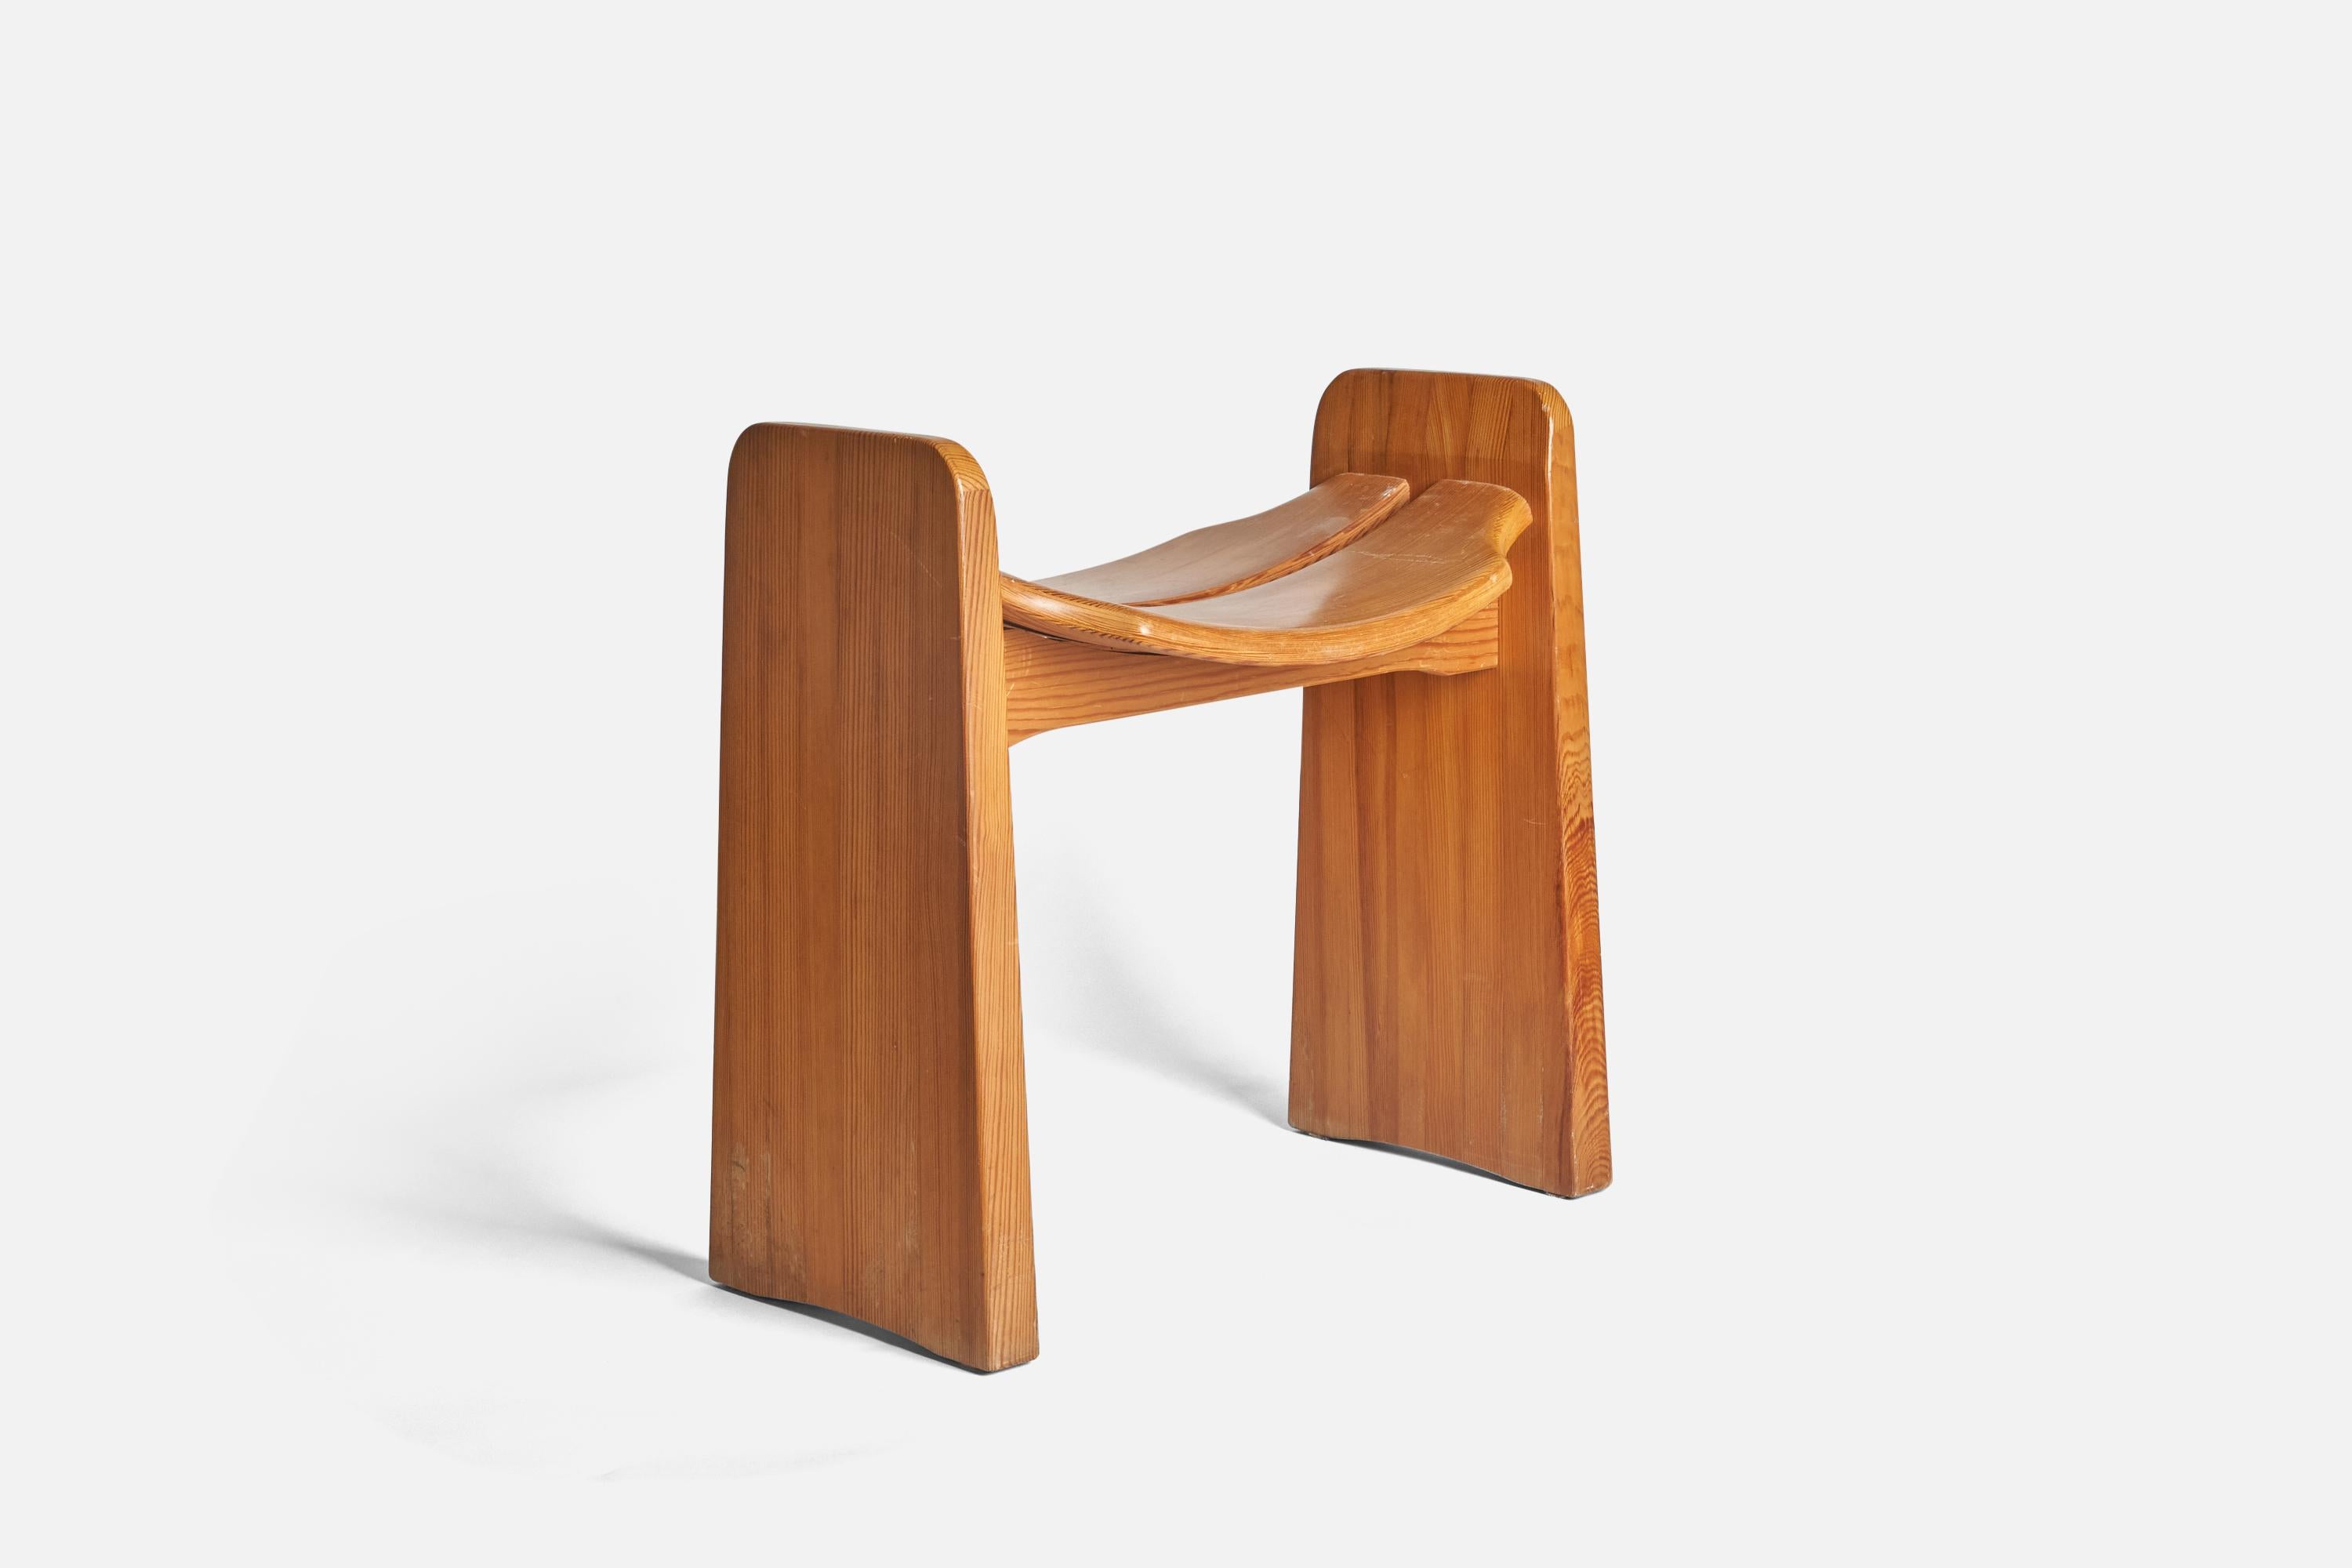 A pine stool designed by Gilbert Marklund and produced by his own firm 